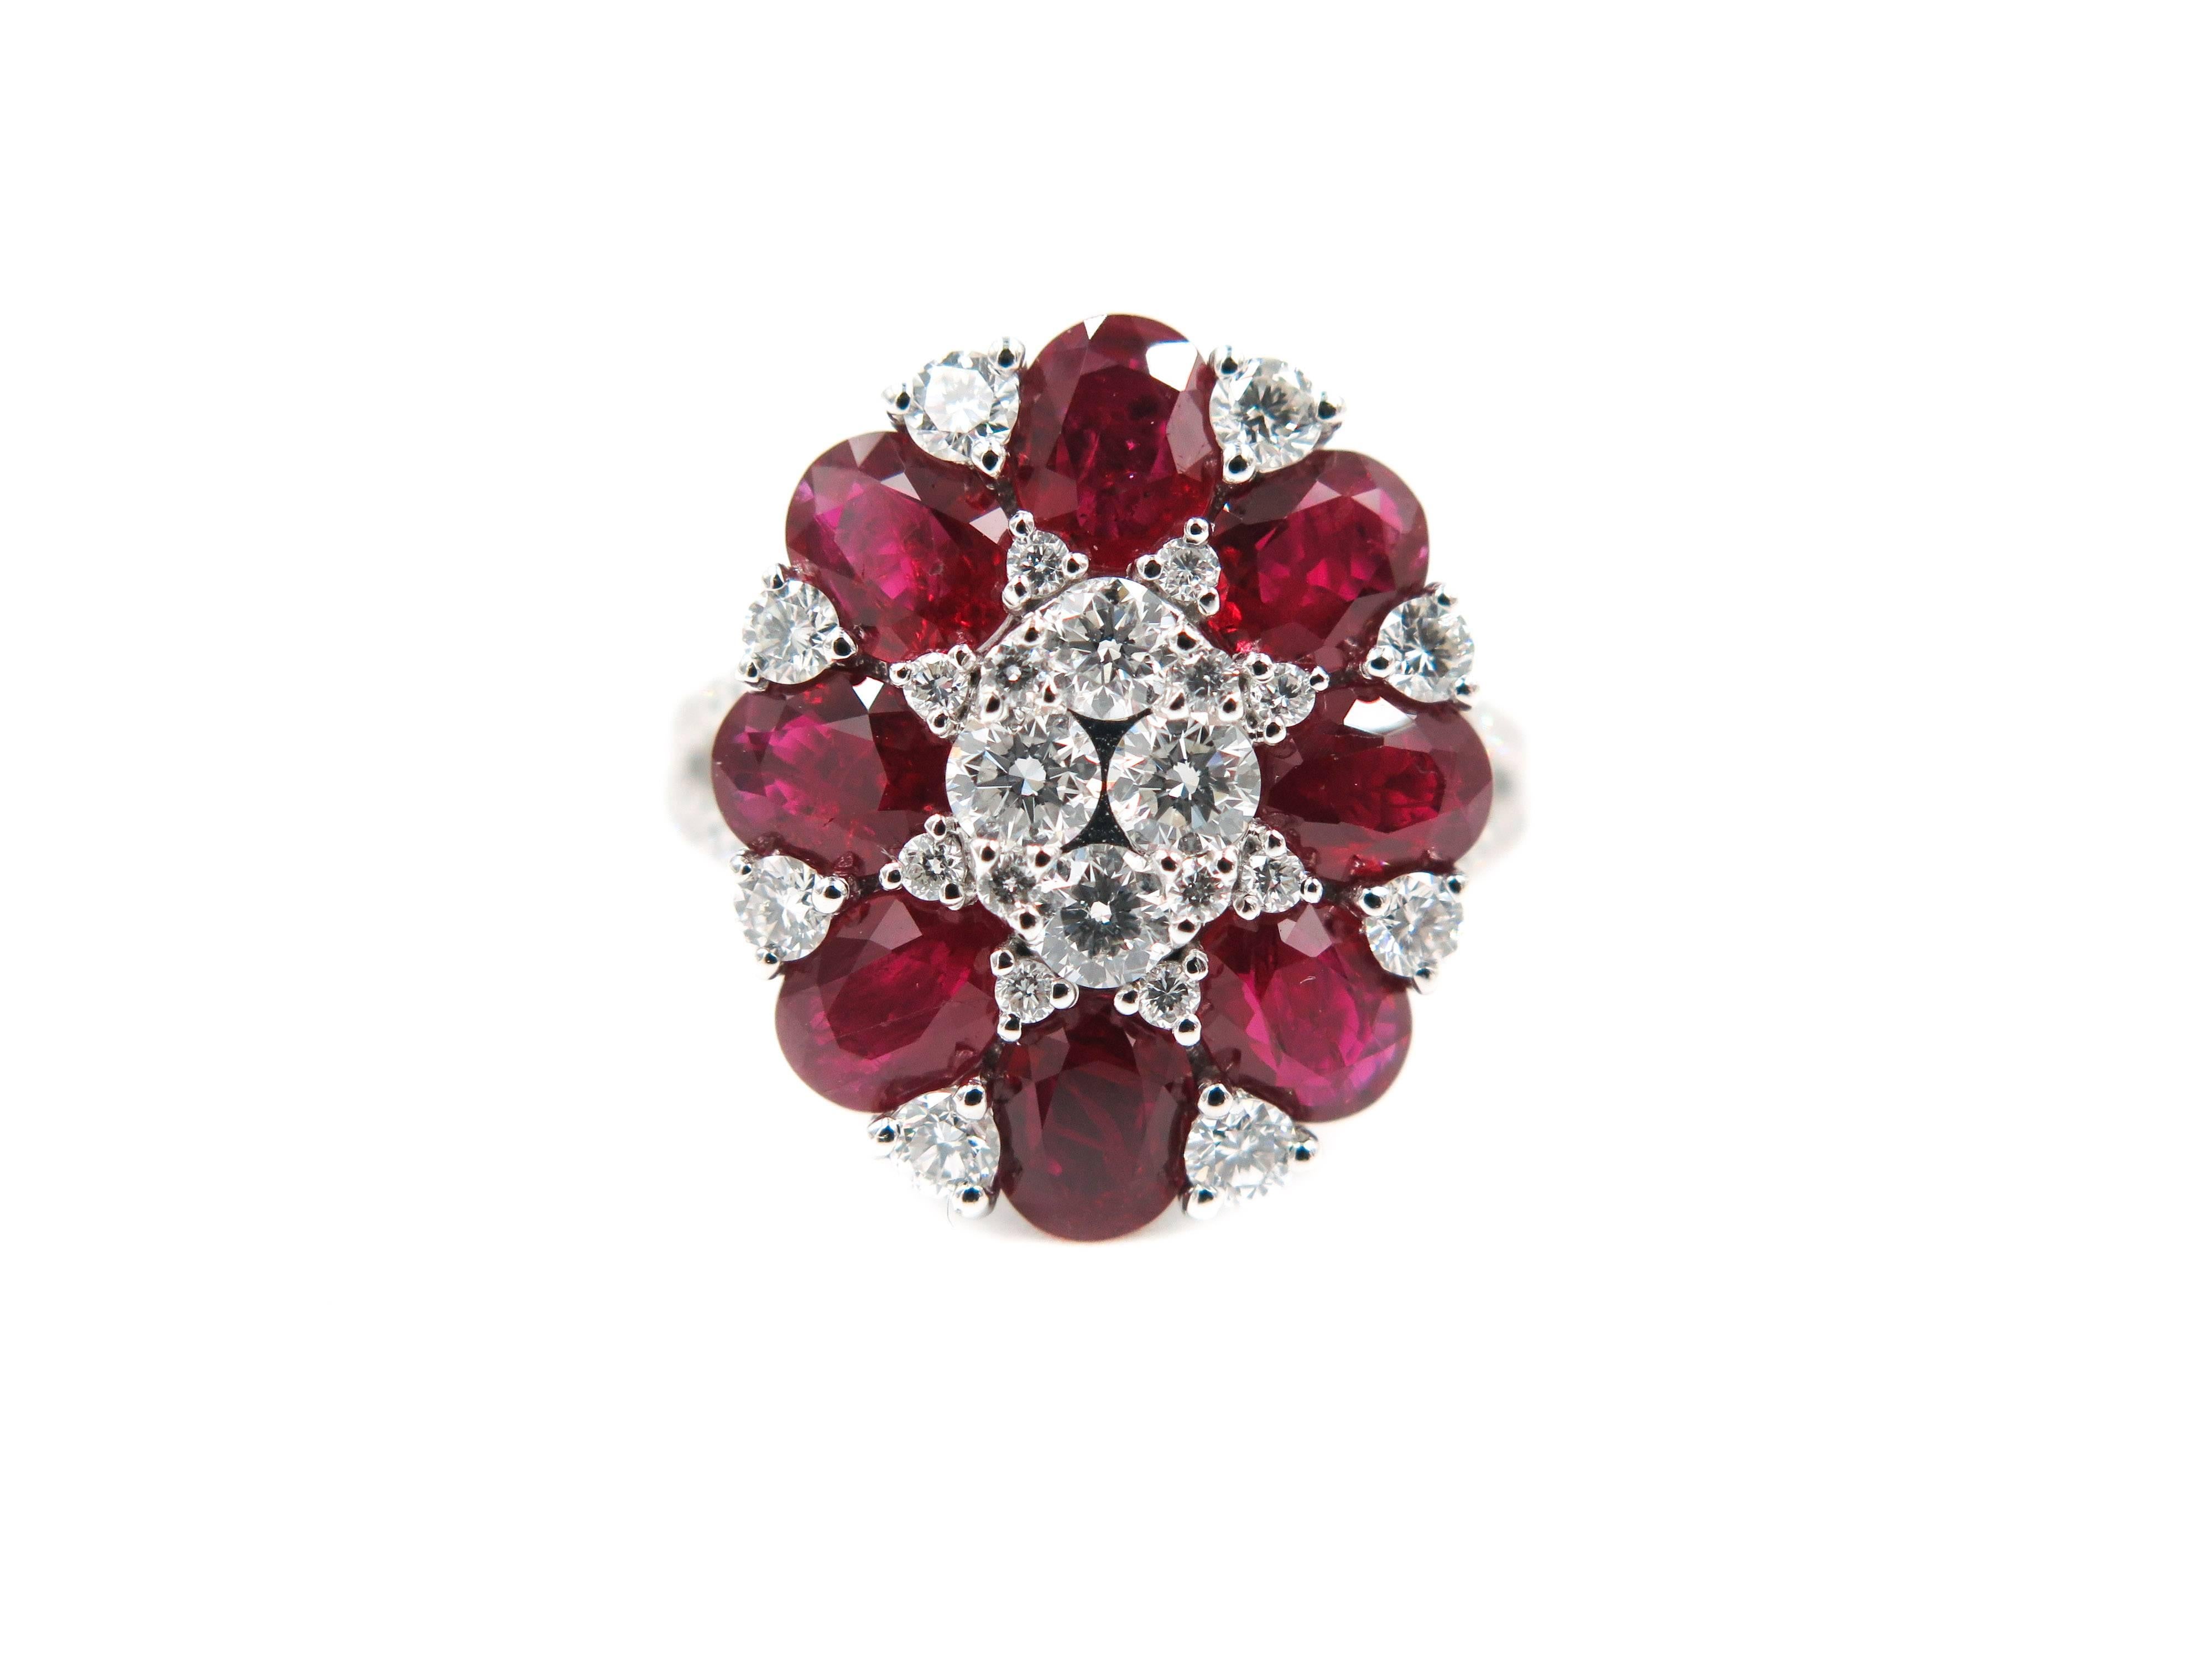 When words are not enough... colors and shapes can speak for themselves. 
Eight oval cut rubies, enriched by 52 round diamonds bloom into this beautiful ring.  
Creatively crafted in 18 karat white gold, with 3.59 carats of ruby and 1.02 carats of